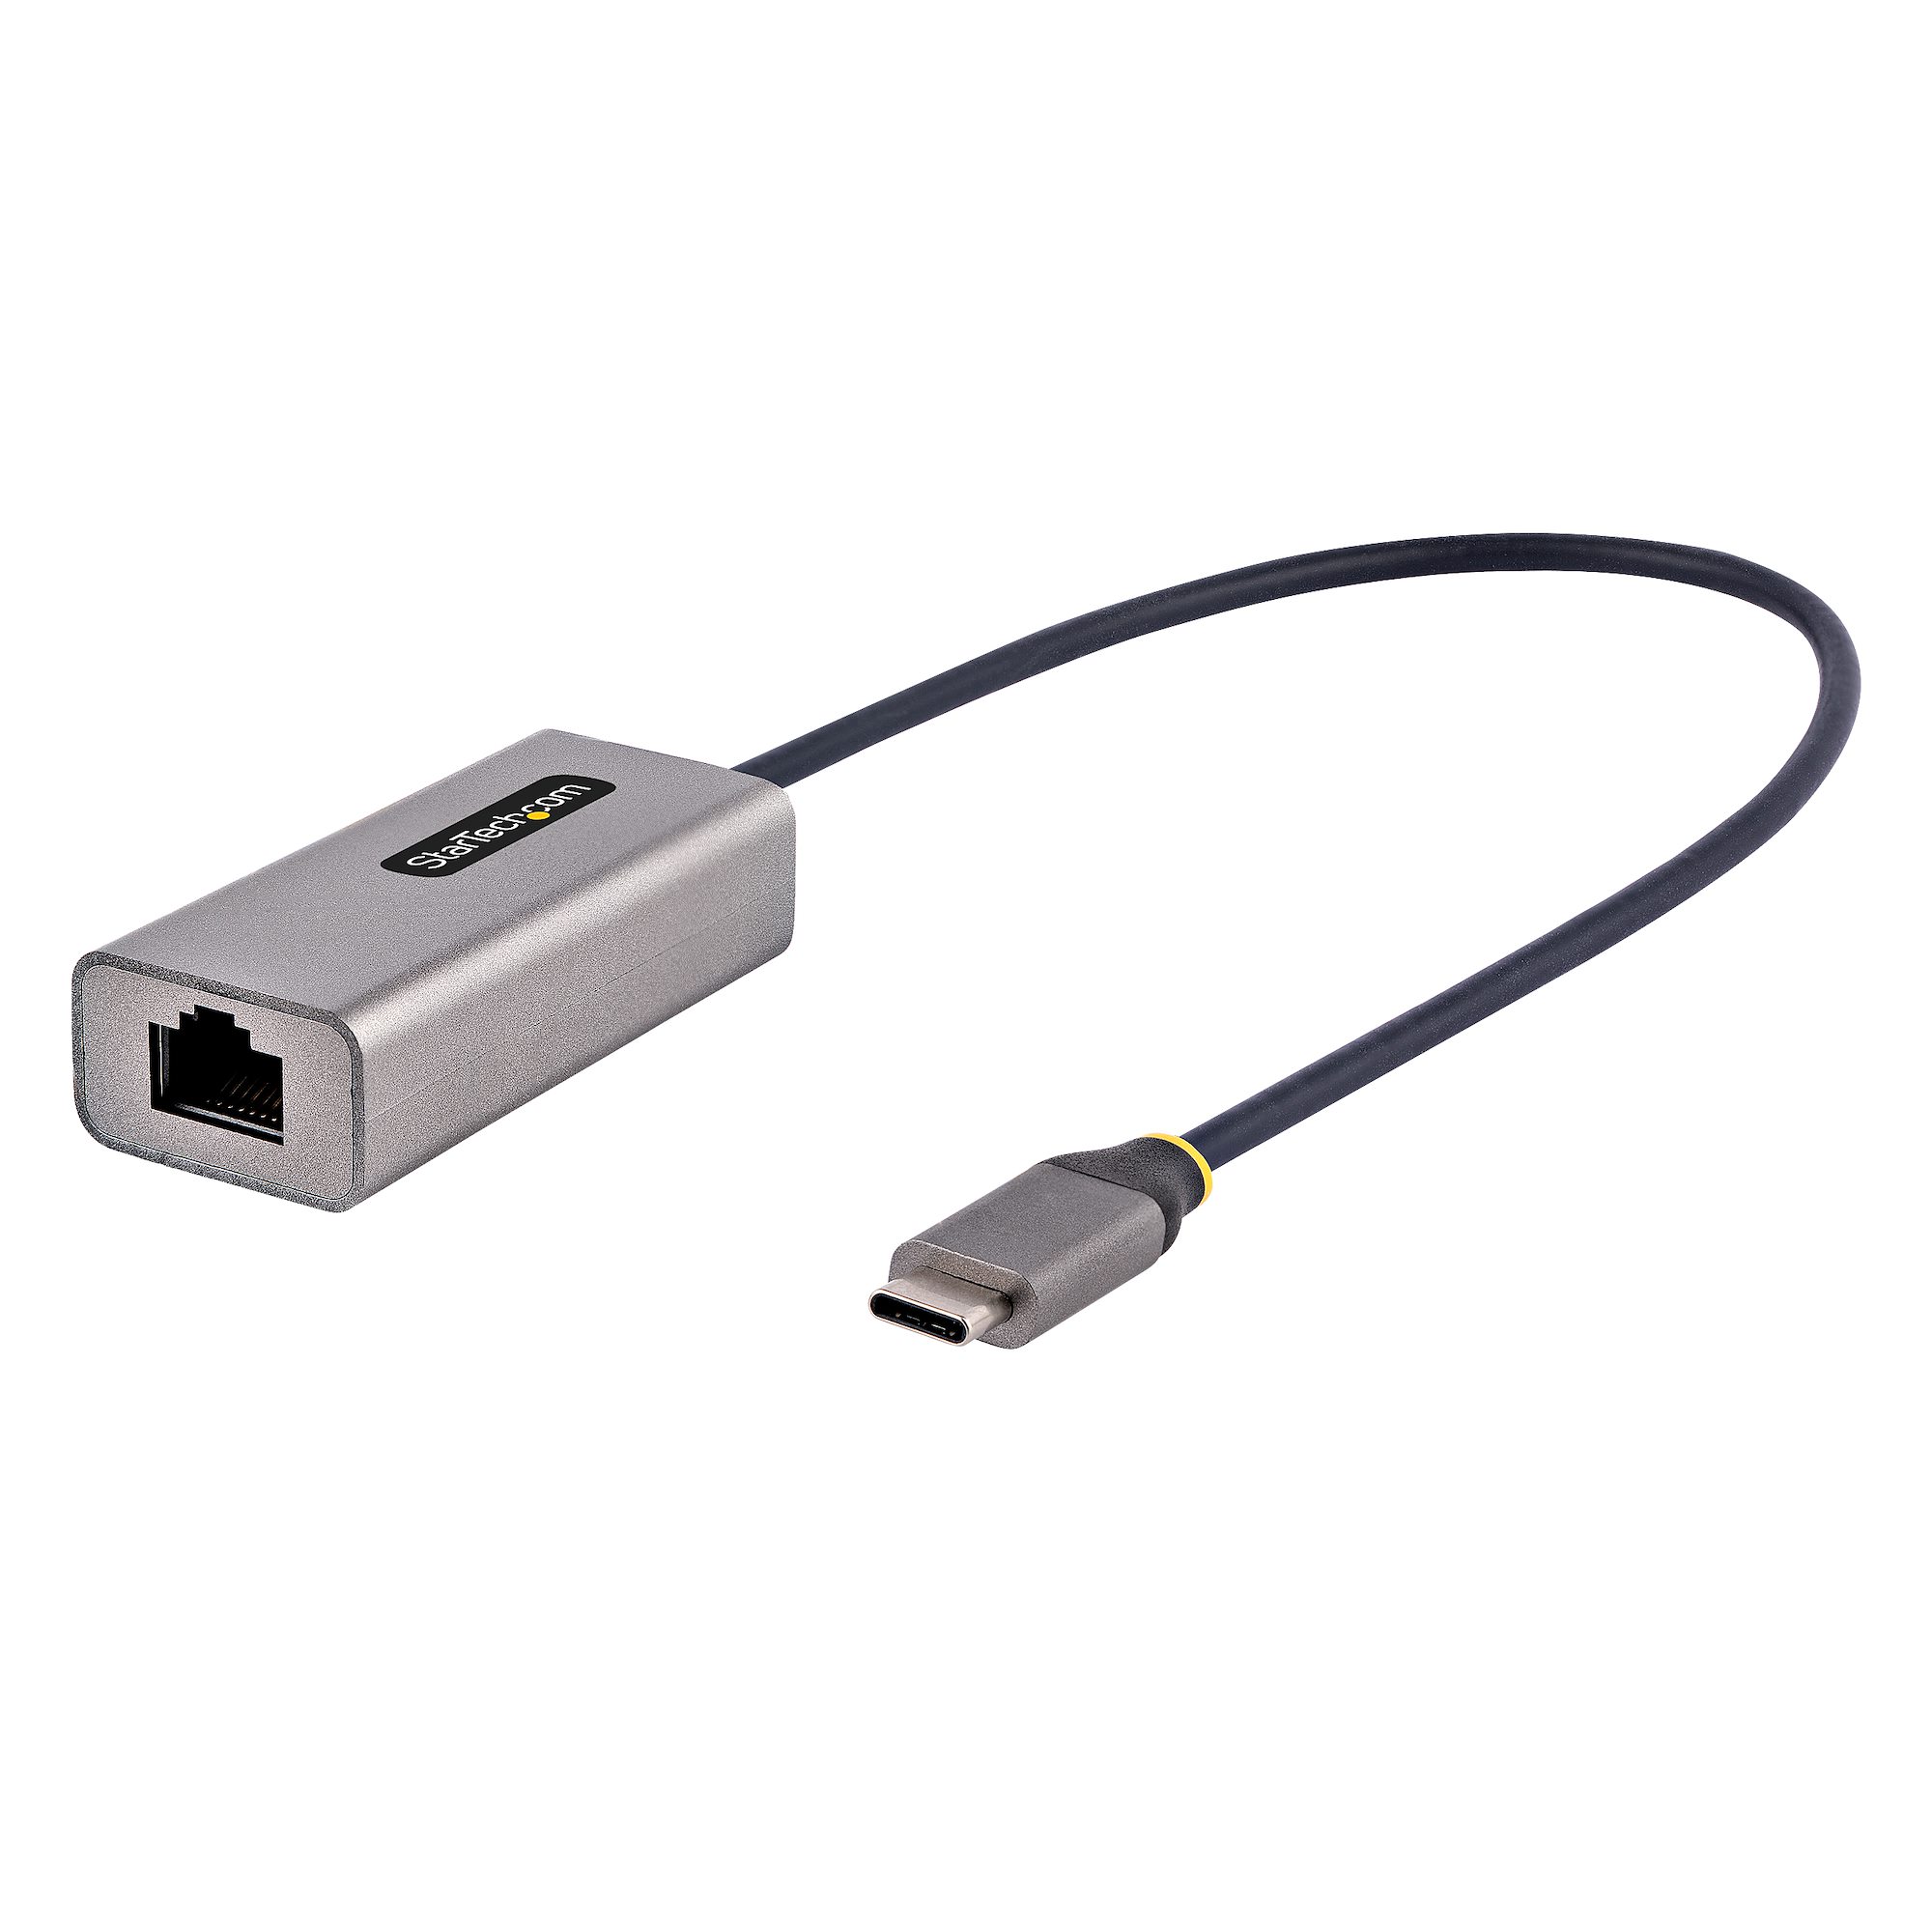 【US1GC30B2】USB-C TO ETHERNET ADAPTER, GIGAB